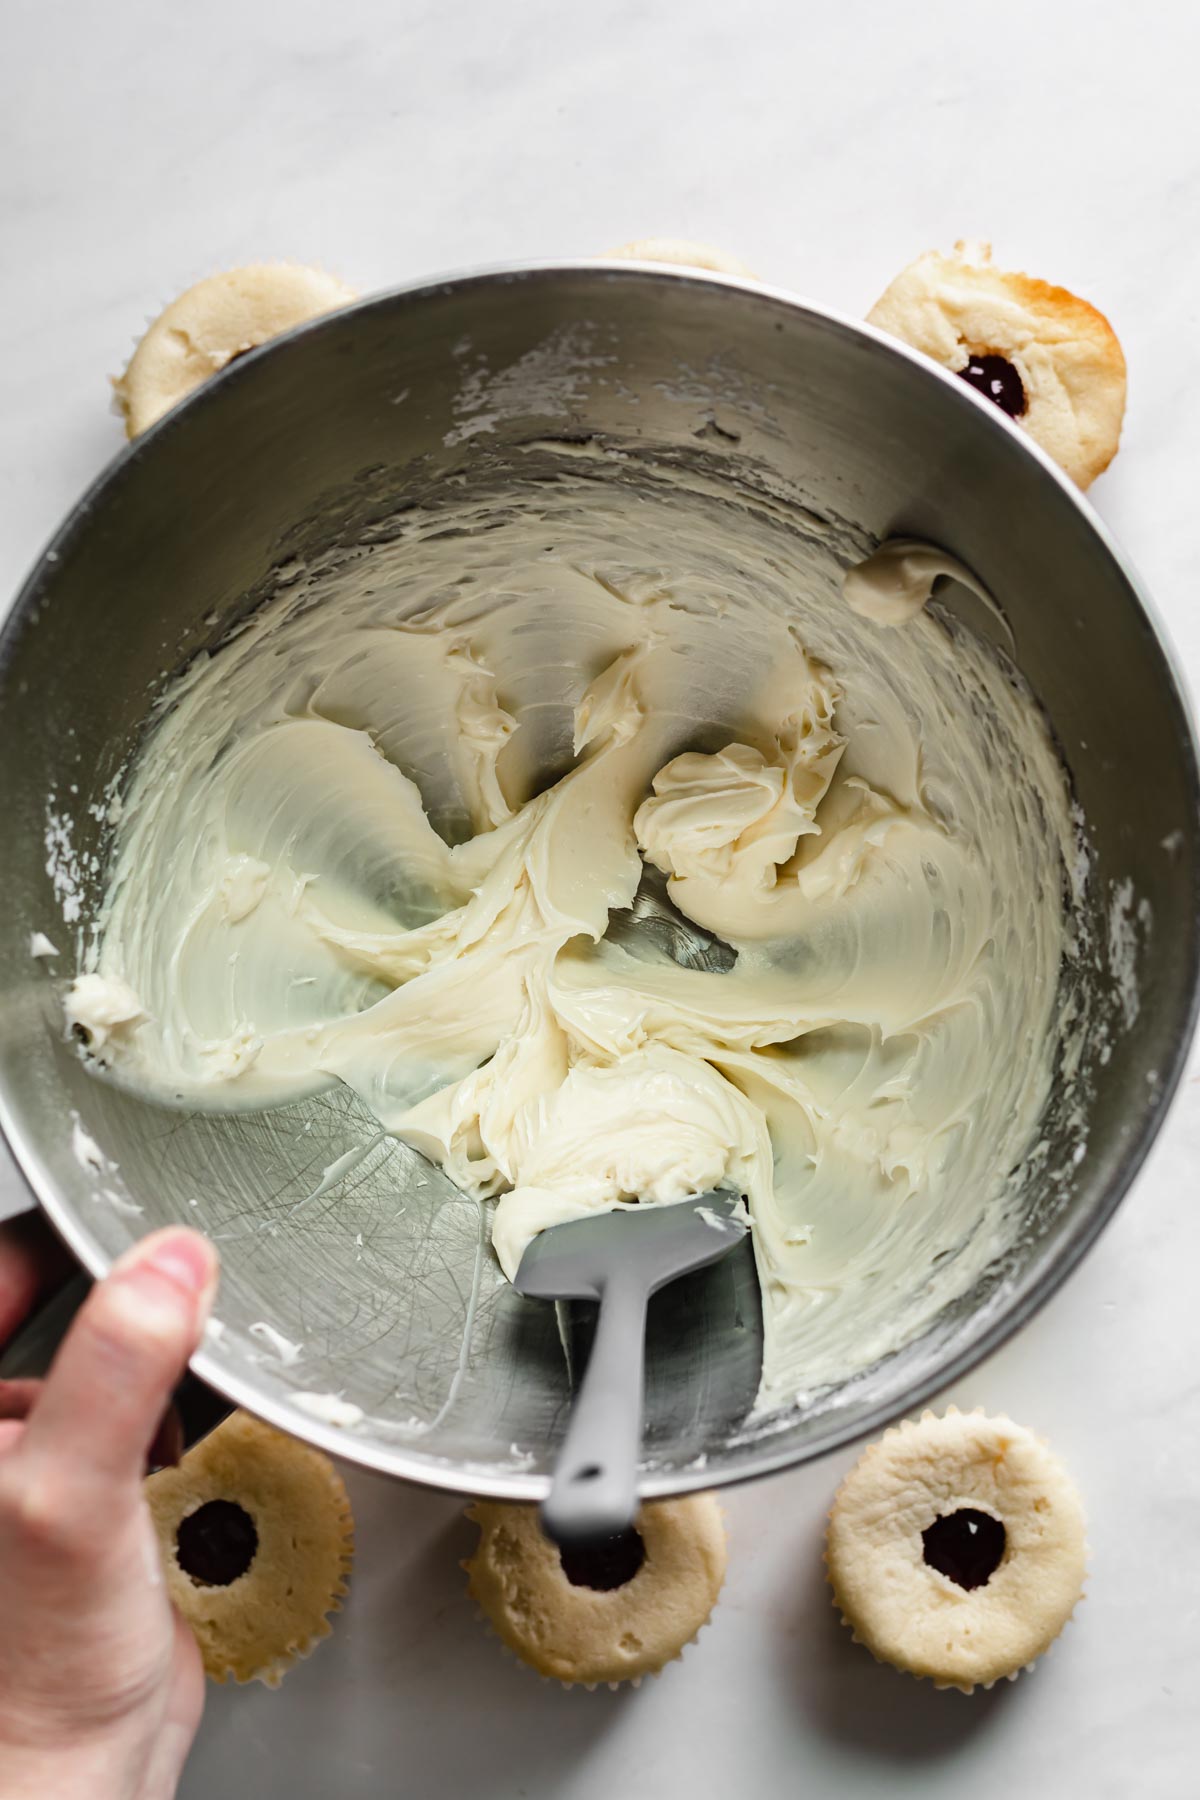 Creamed cream cheese being scraped off the sides of a mixing bowl.